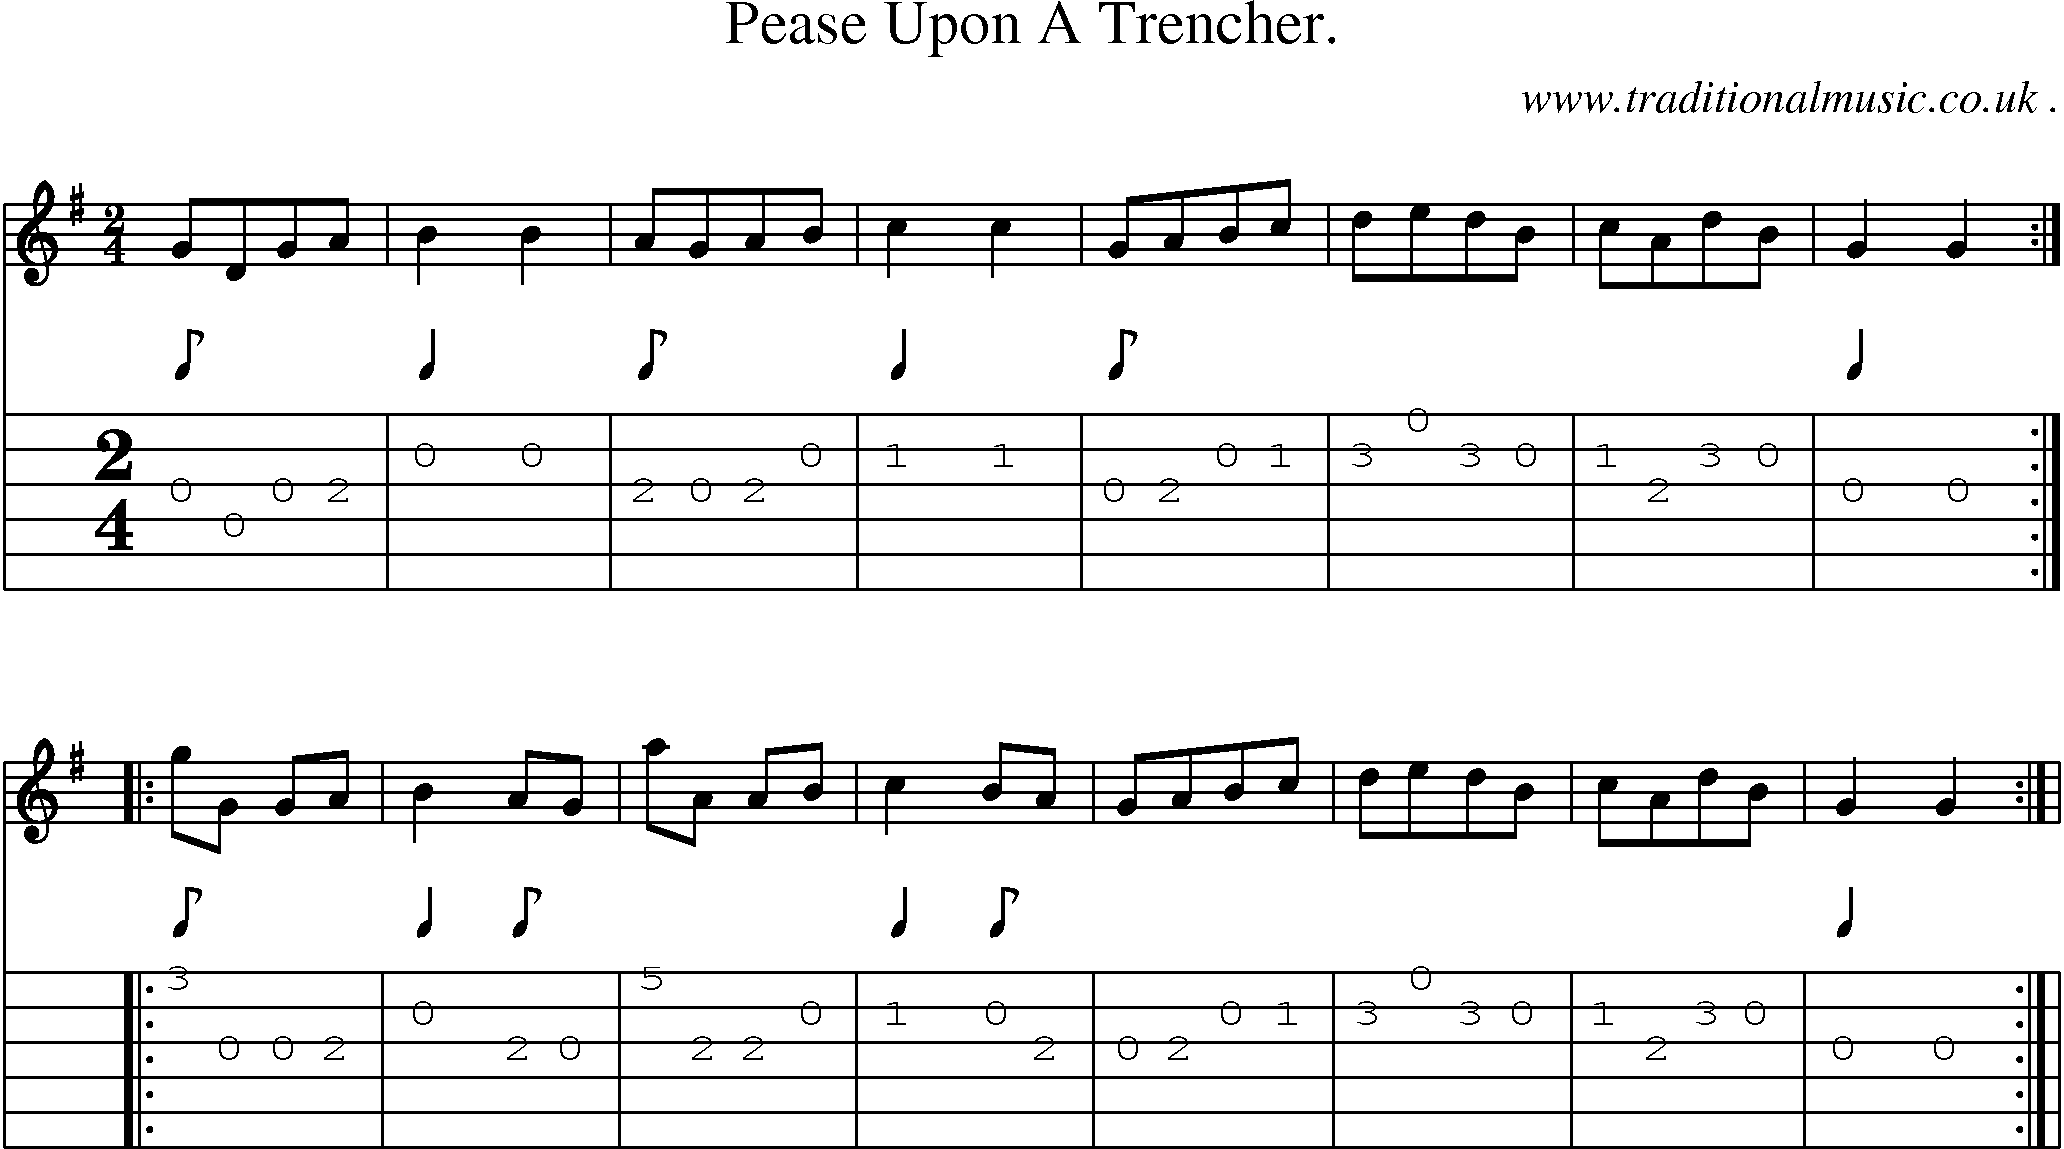 Sheet-Music and Guitar Tabs for Pease Upon A Trencher